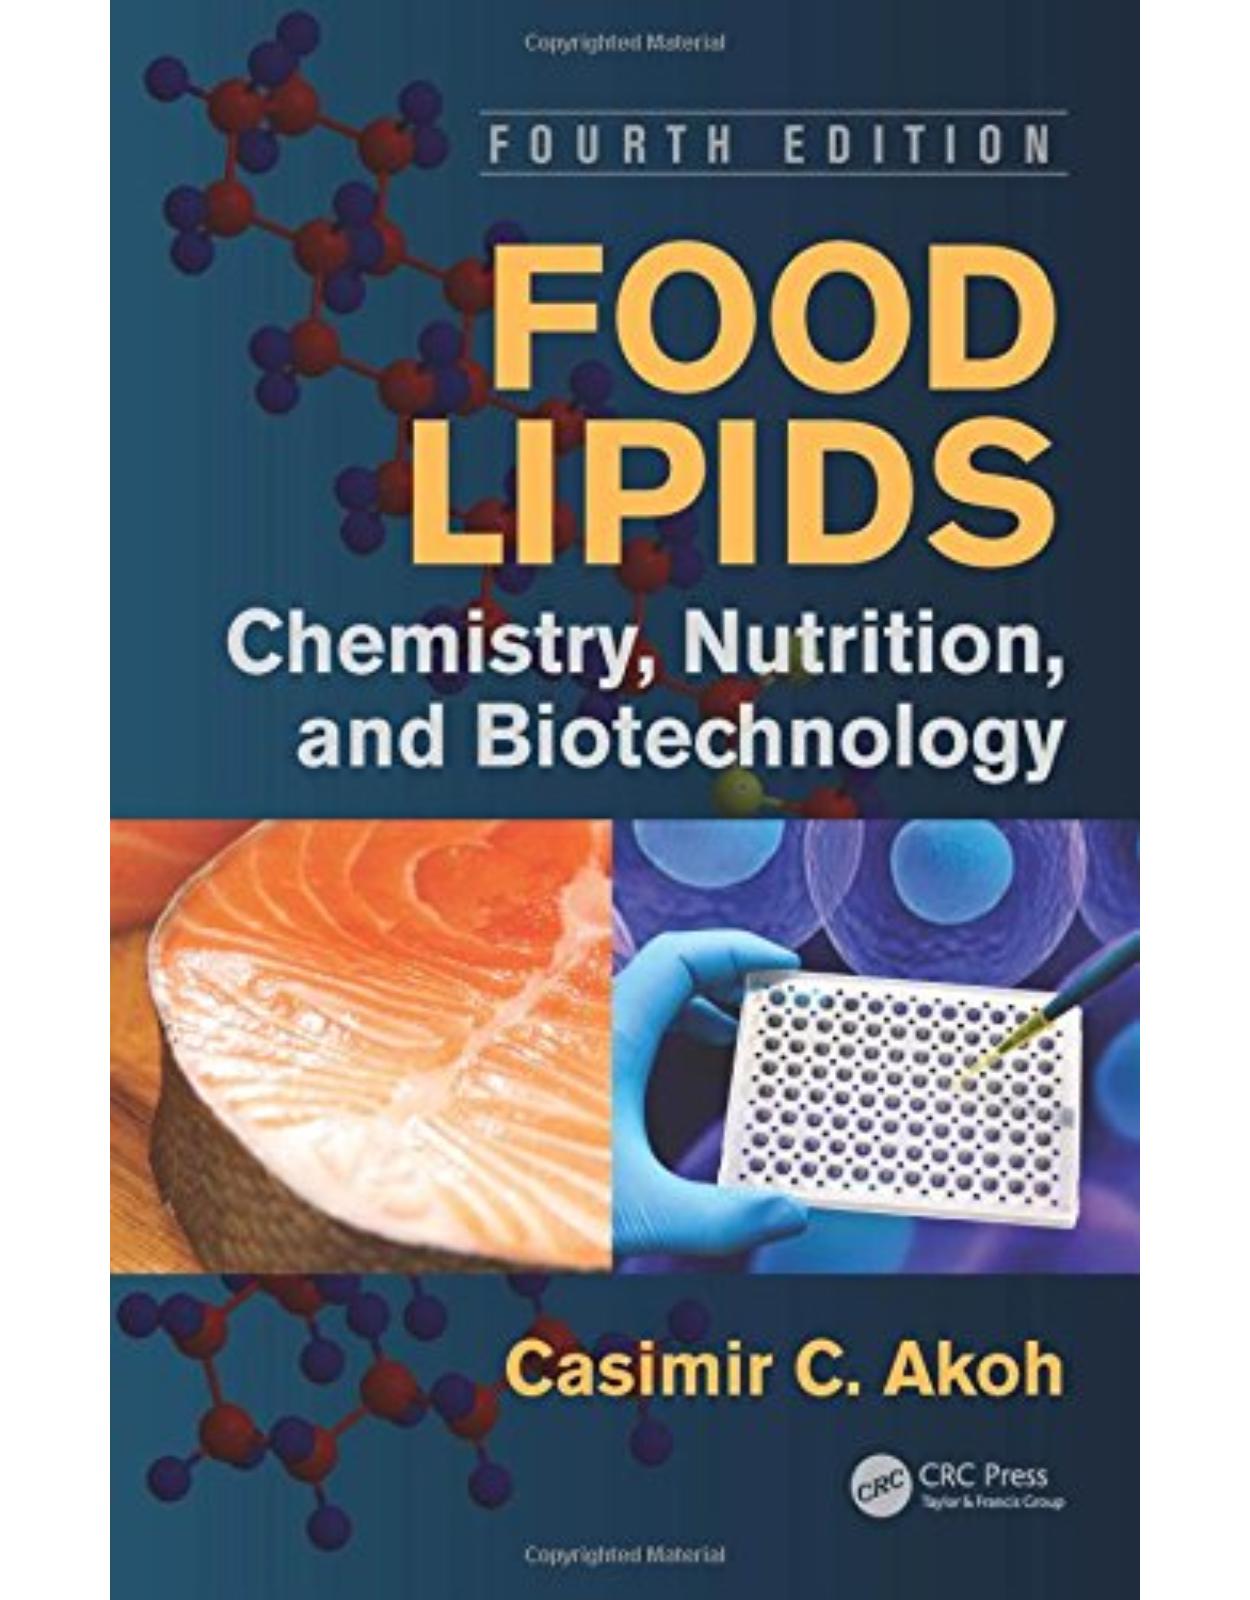 Food Lipids: Chemistry, Nutrition, and Biotechnology, Fourth Edition